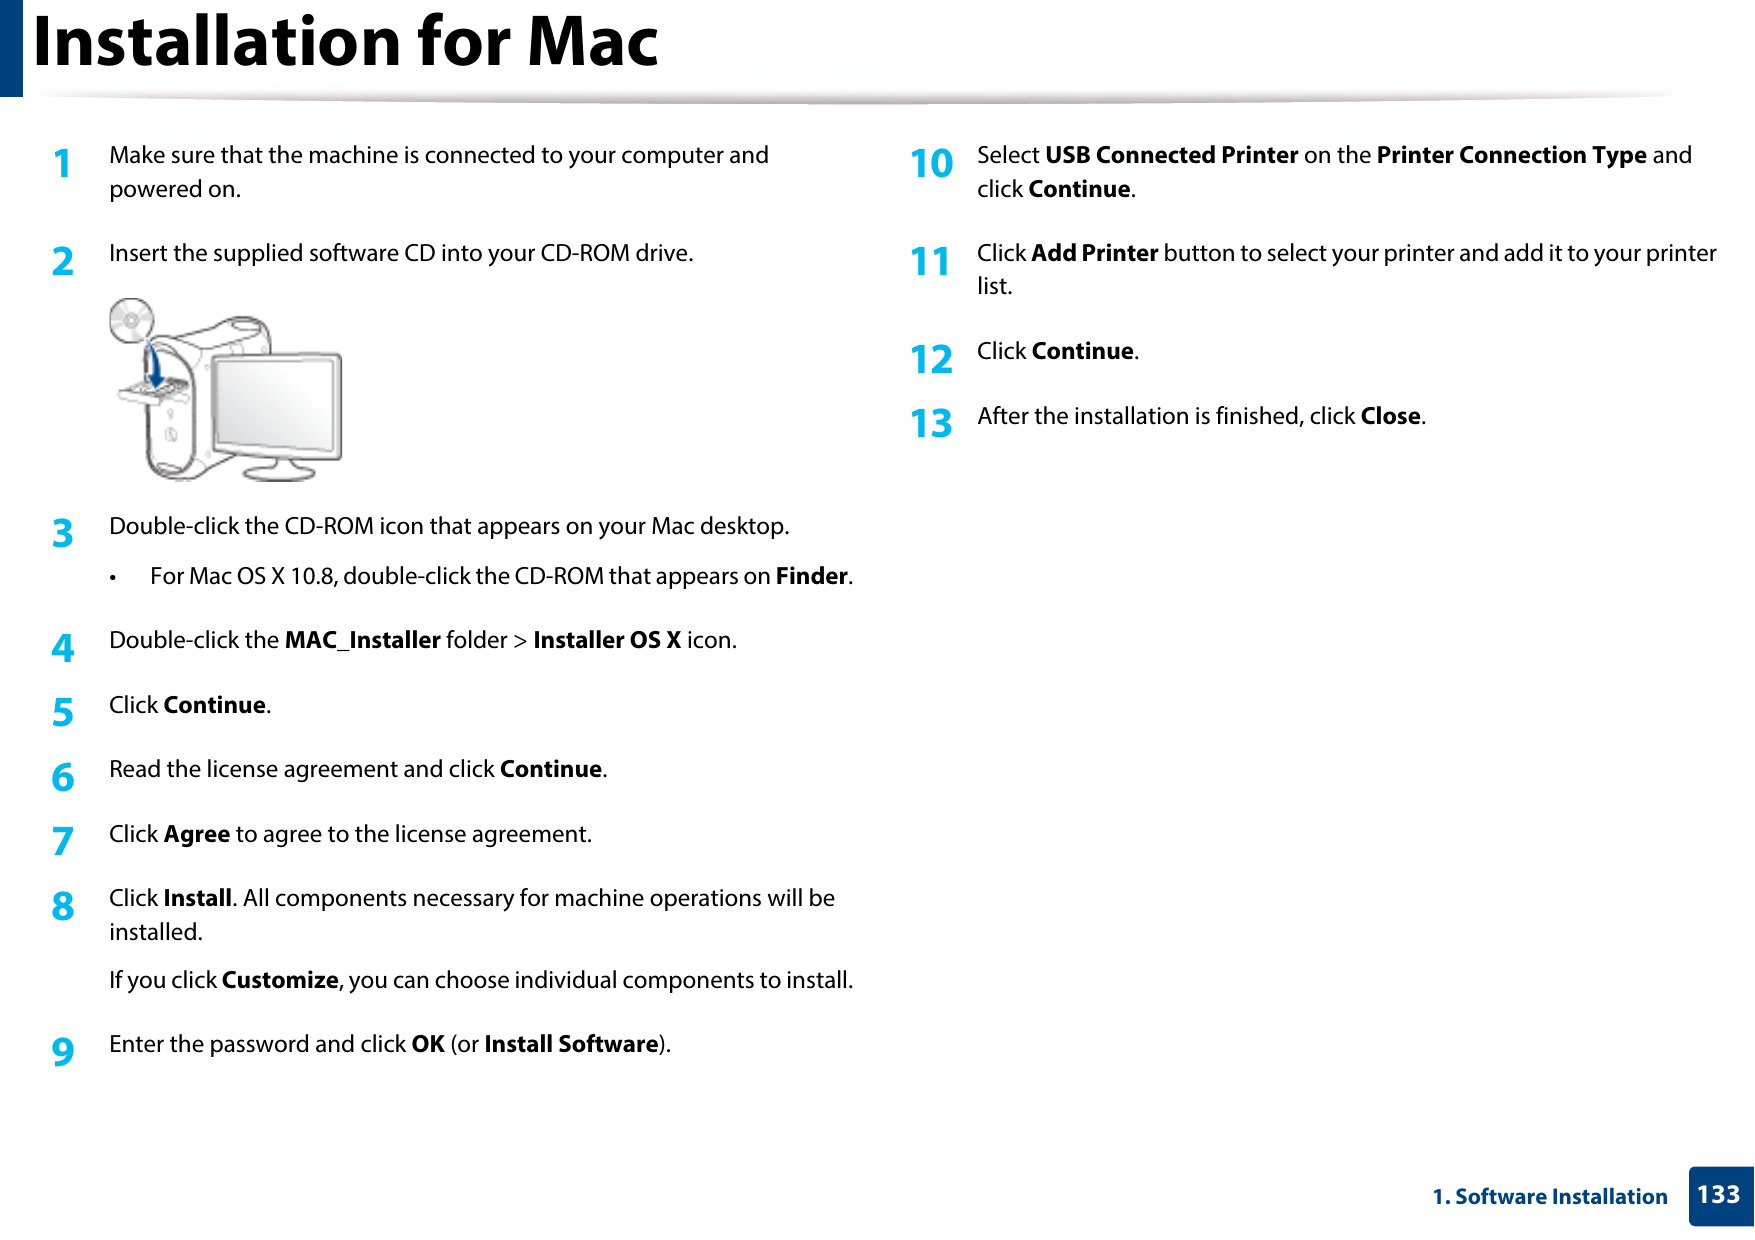 1331. Software InstallationInstallation for Mac1Make sure that the machine is connected to your computer and powered on.2  Insert the supplied software CD into your CD-ROM drive.3  Double-click the CD-ROM icon that appears on your Mac desktop.• For Mac OS X 10.8, double-click the CD-ROM that appears on Finder.4  Double-click the MAC_Installer folder &gt; Installer OS X icon.5  Click Continue.6  Read the license agreement and click Continue.7  Click Agree to agree to the license agreement.8  Click Install. All components necessary for machine operations will be installed.If you click Customize, you can choose individual components to install.9  Enter the password and click OK (or Install Software).10  Select USB Connected Printer on the Printer Connection Type and click Continue.11  Click Add Printer button to select your printer and add it to your printer list.12  Click Continue.13  After the installation is finished, click Close.